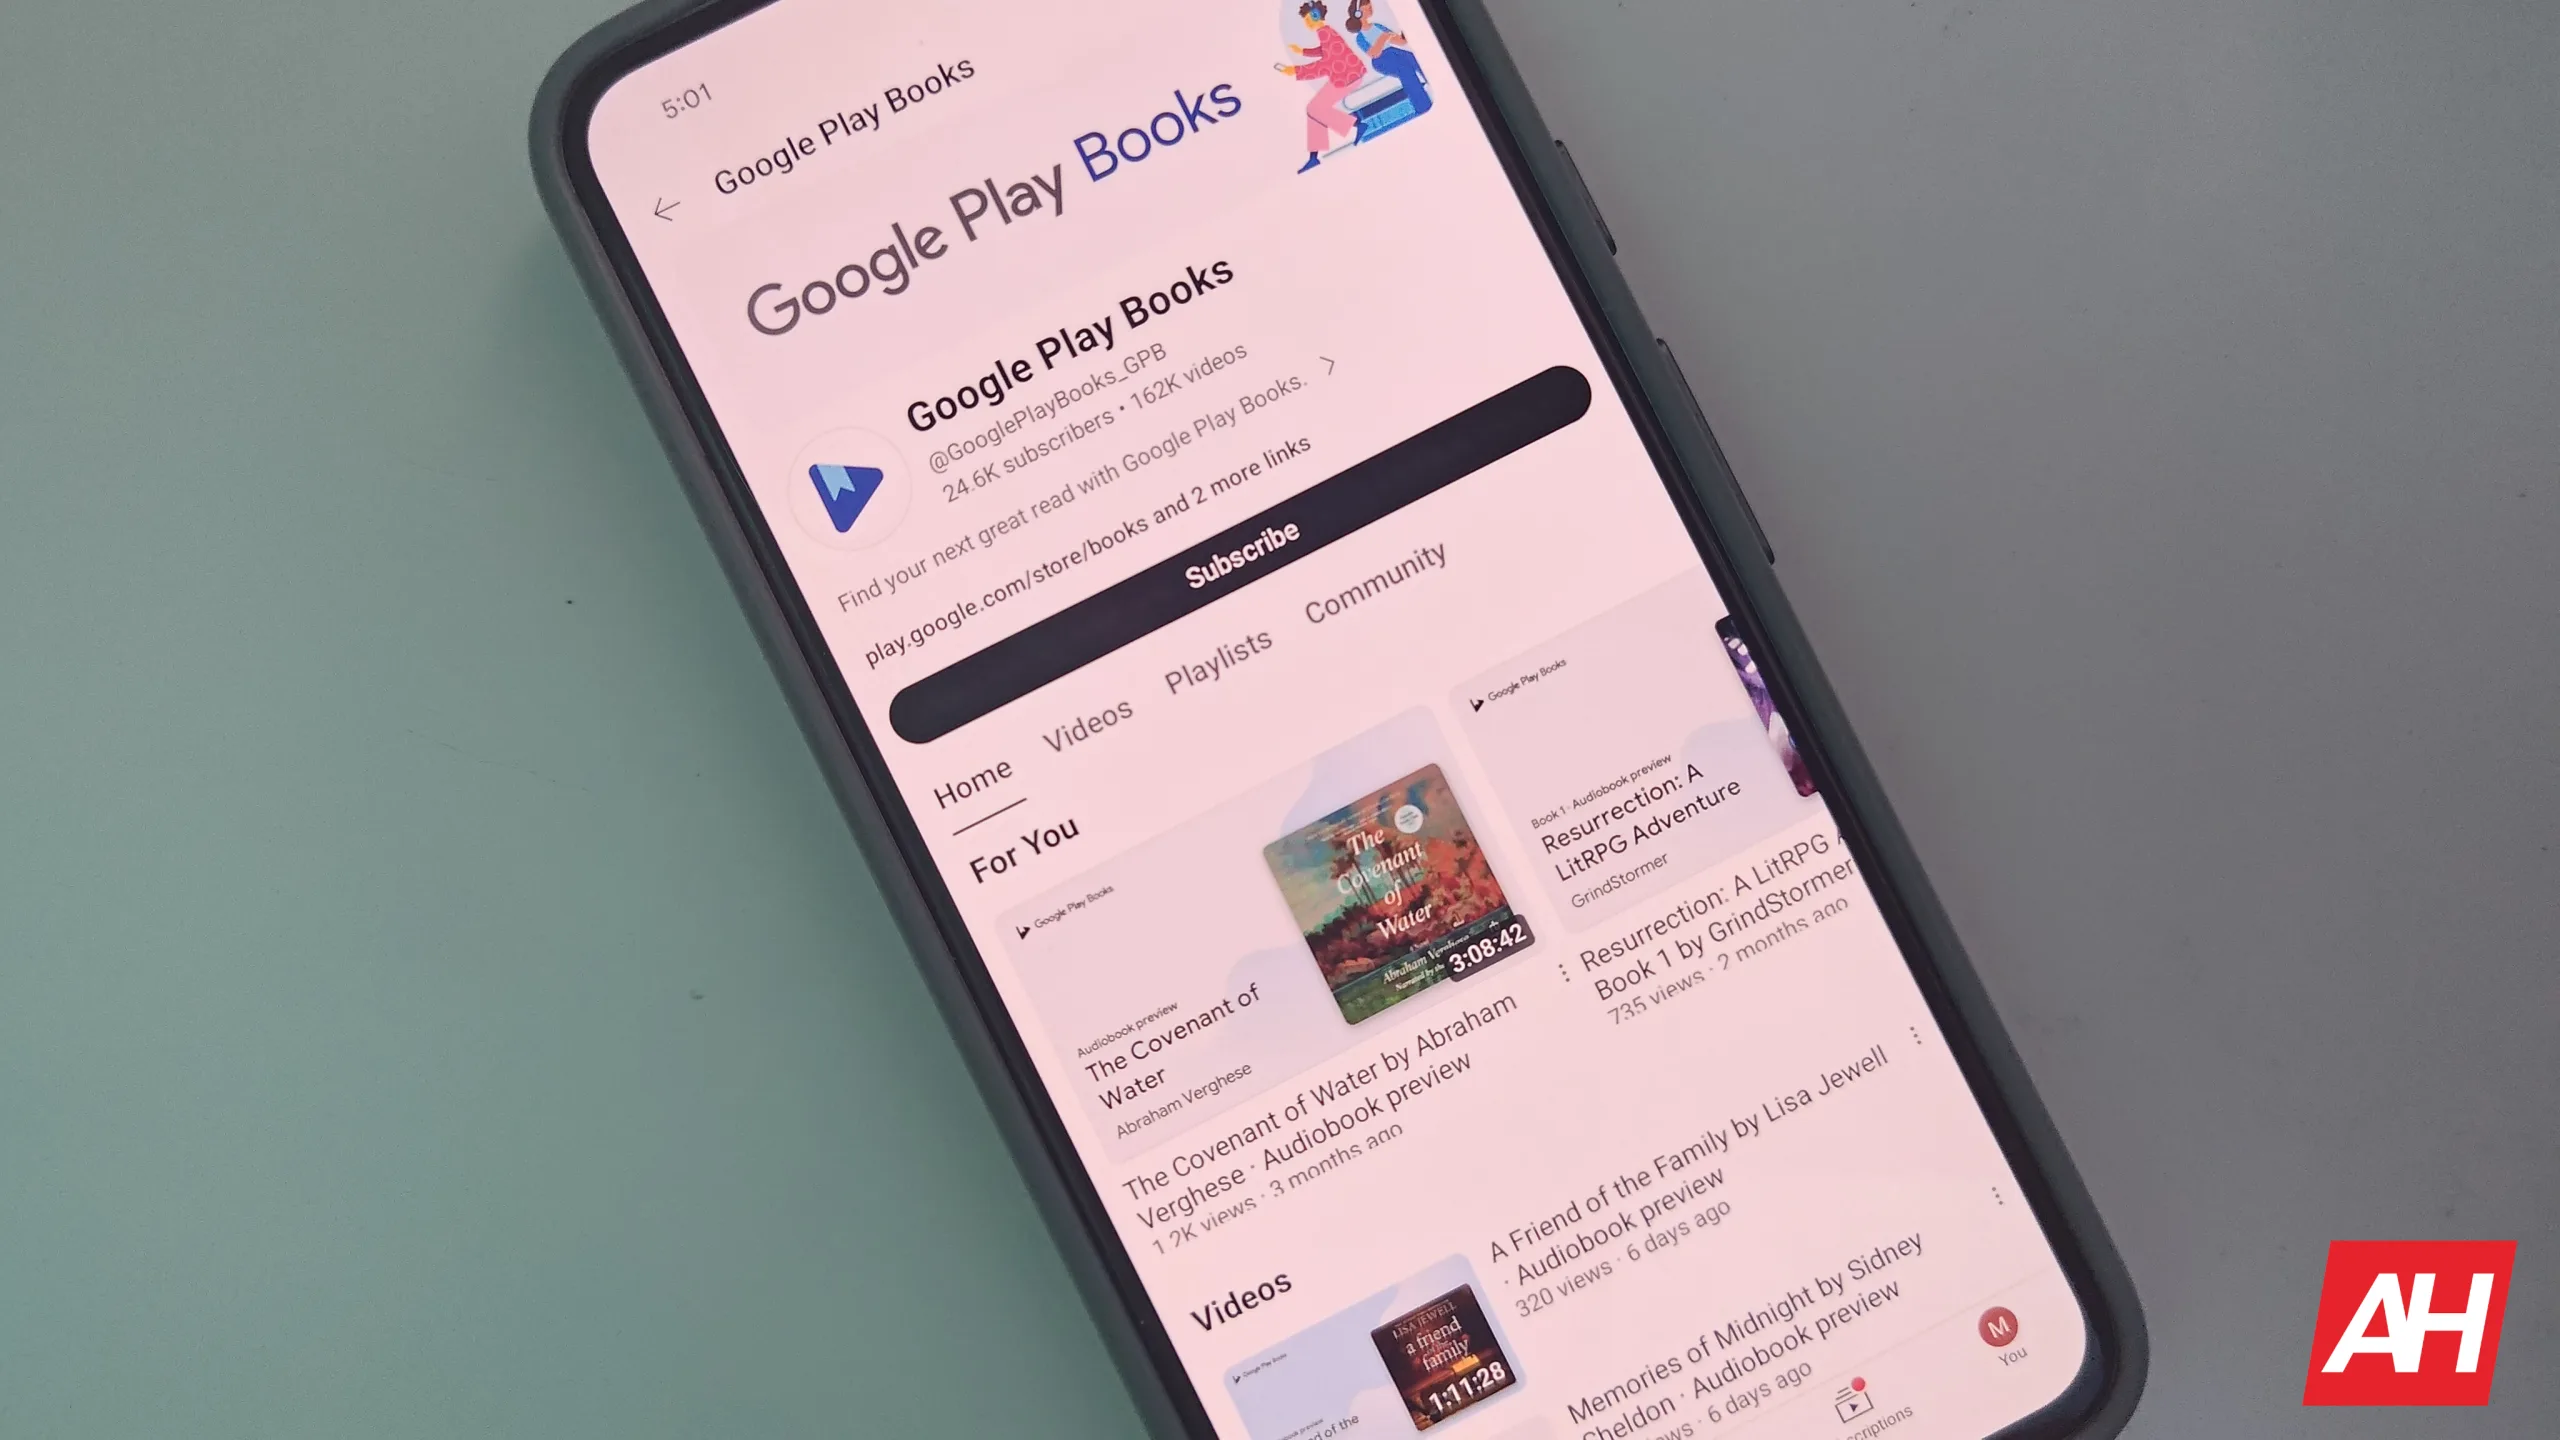 Audiobook previews from Google Play Books now on YouTube